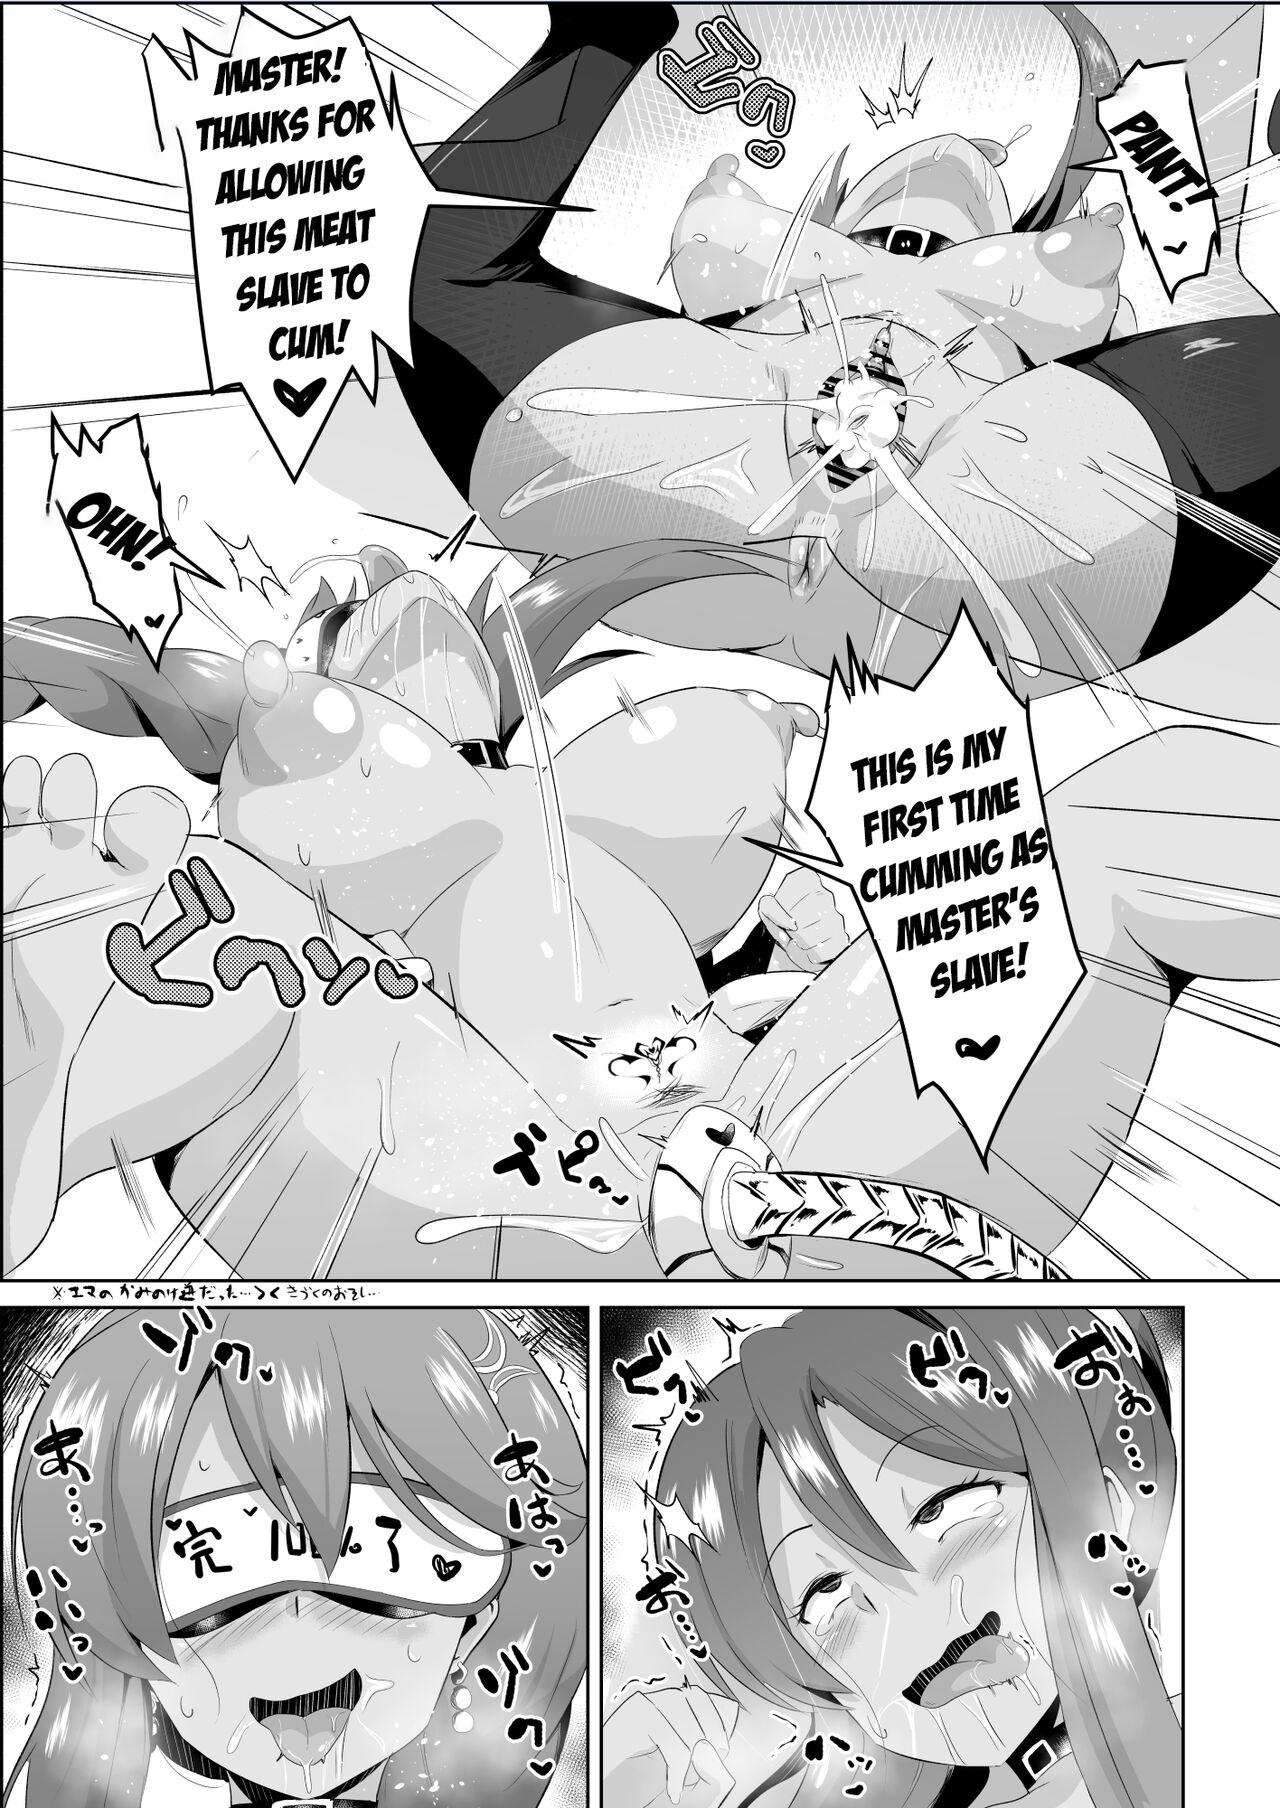 Jerking Off NTR Hypnotic Academy - Chapter 7 - The legend of heroes | eiyuu densetsu 3some - Page 8